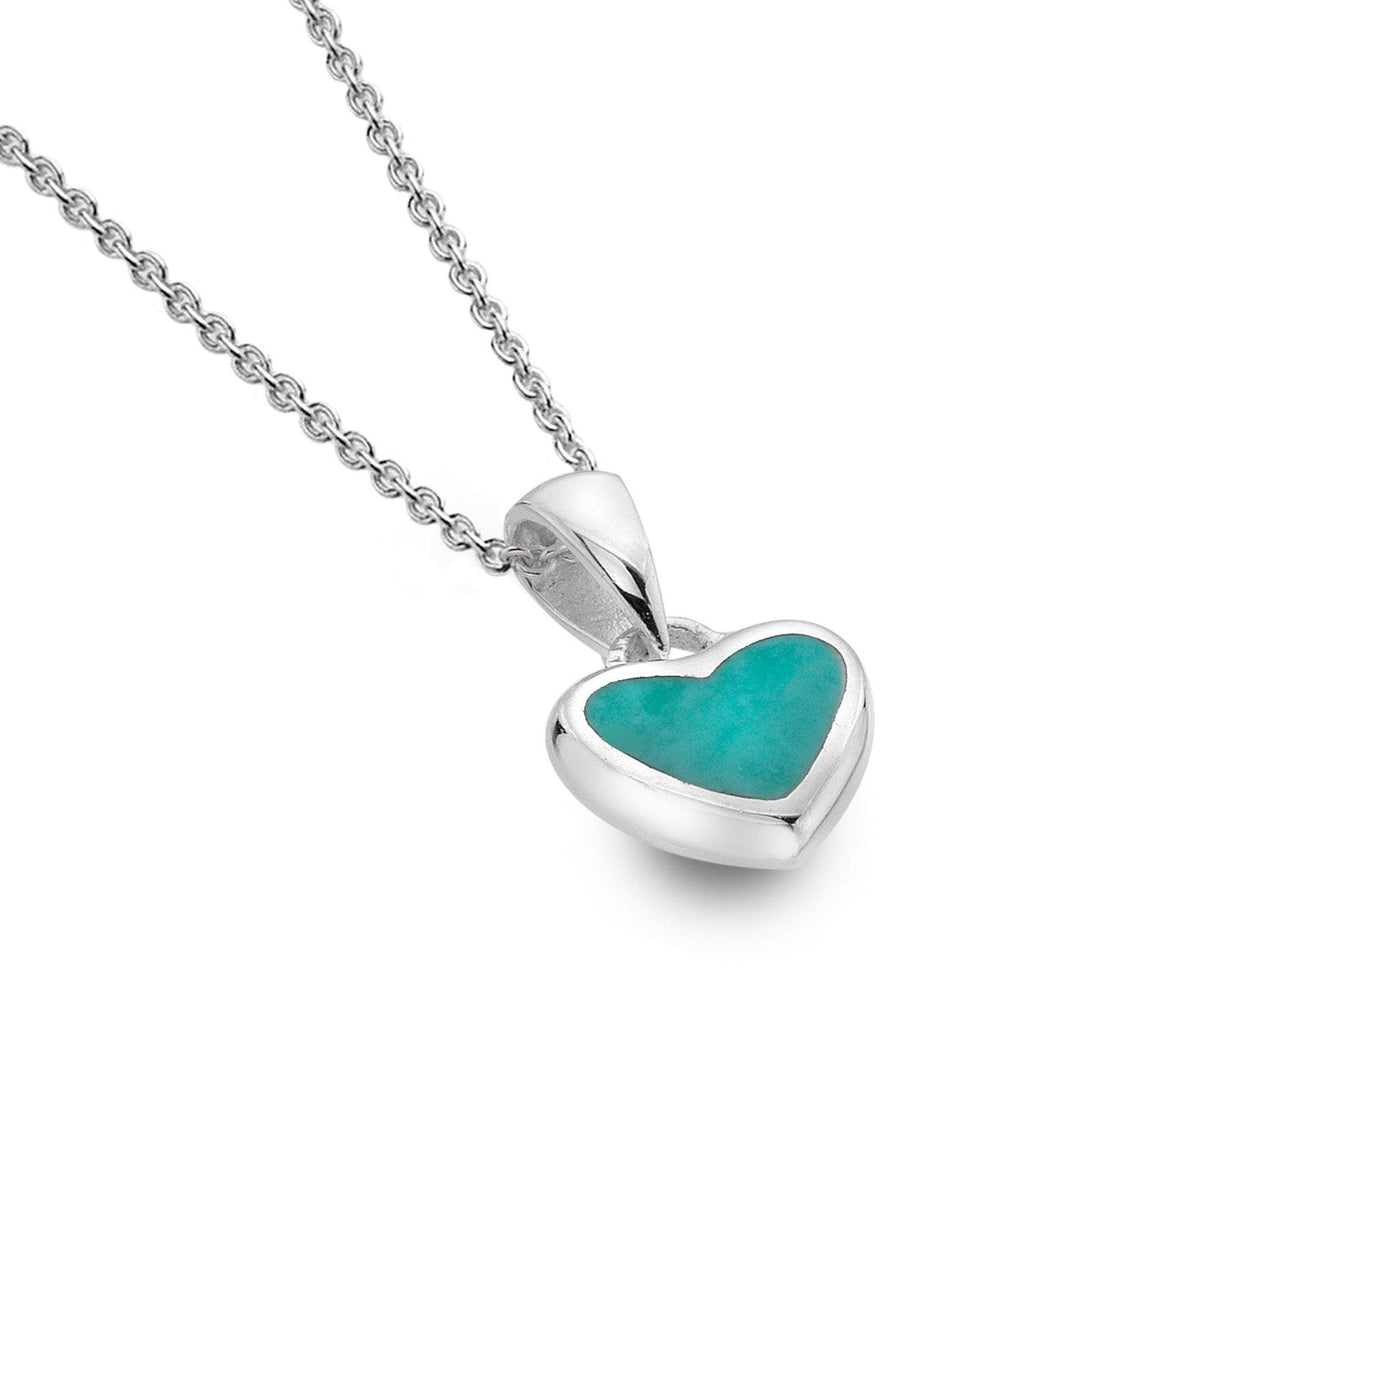 Sea Gems Silver and Turquoise Heart Necklace - Rococo Jewellery